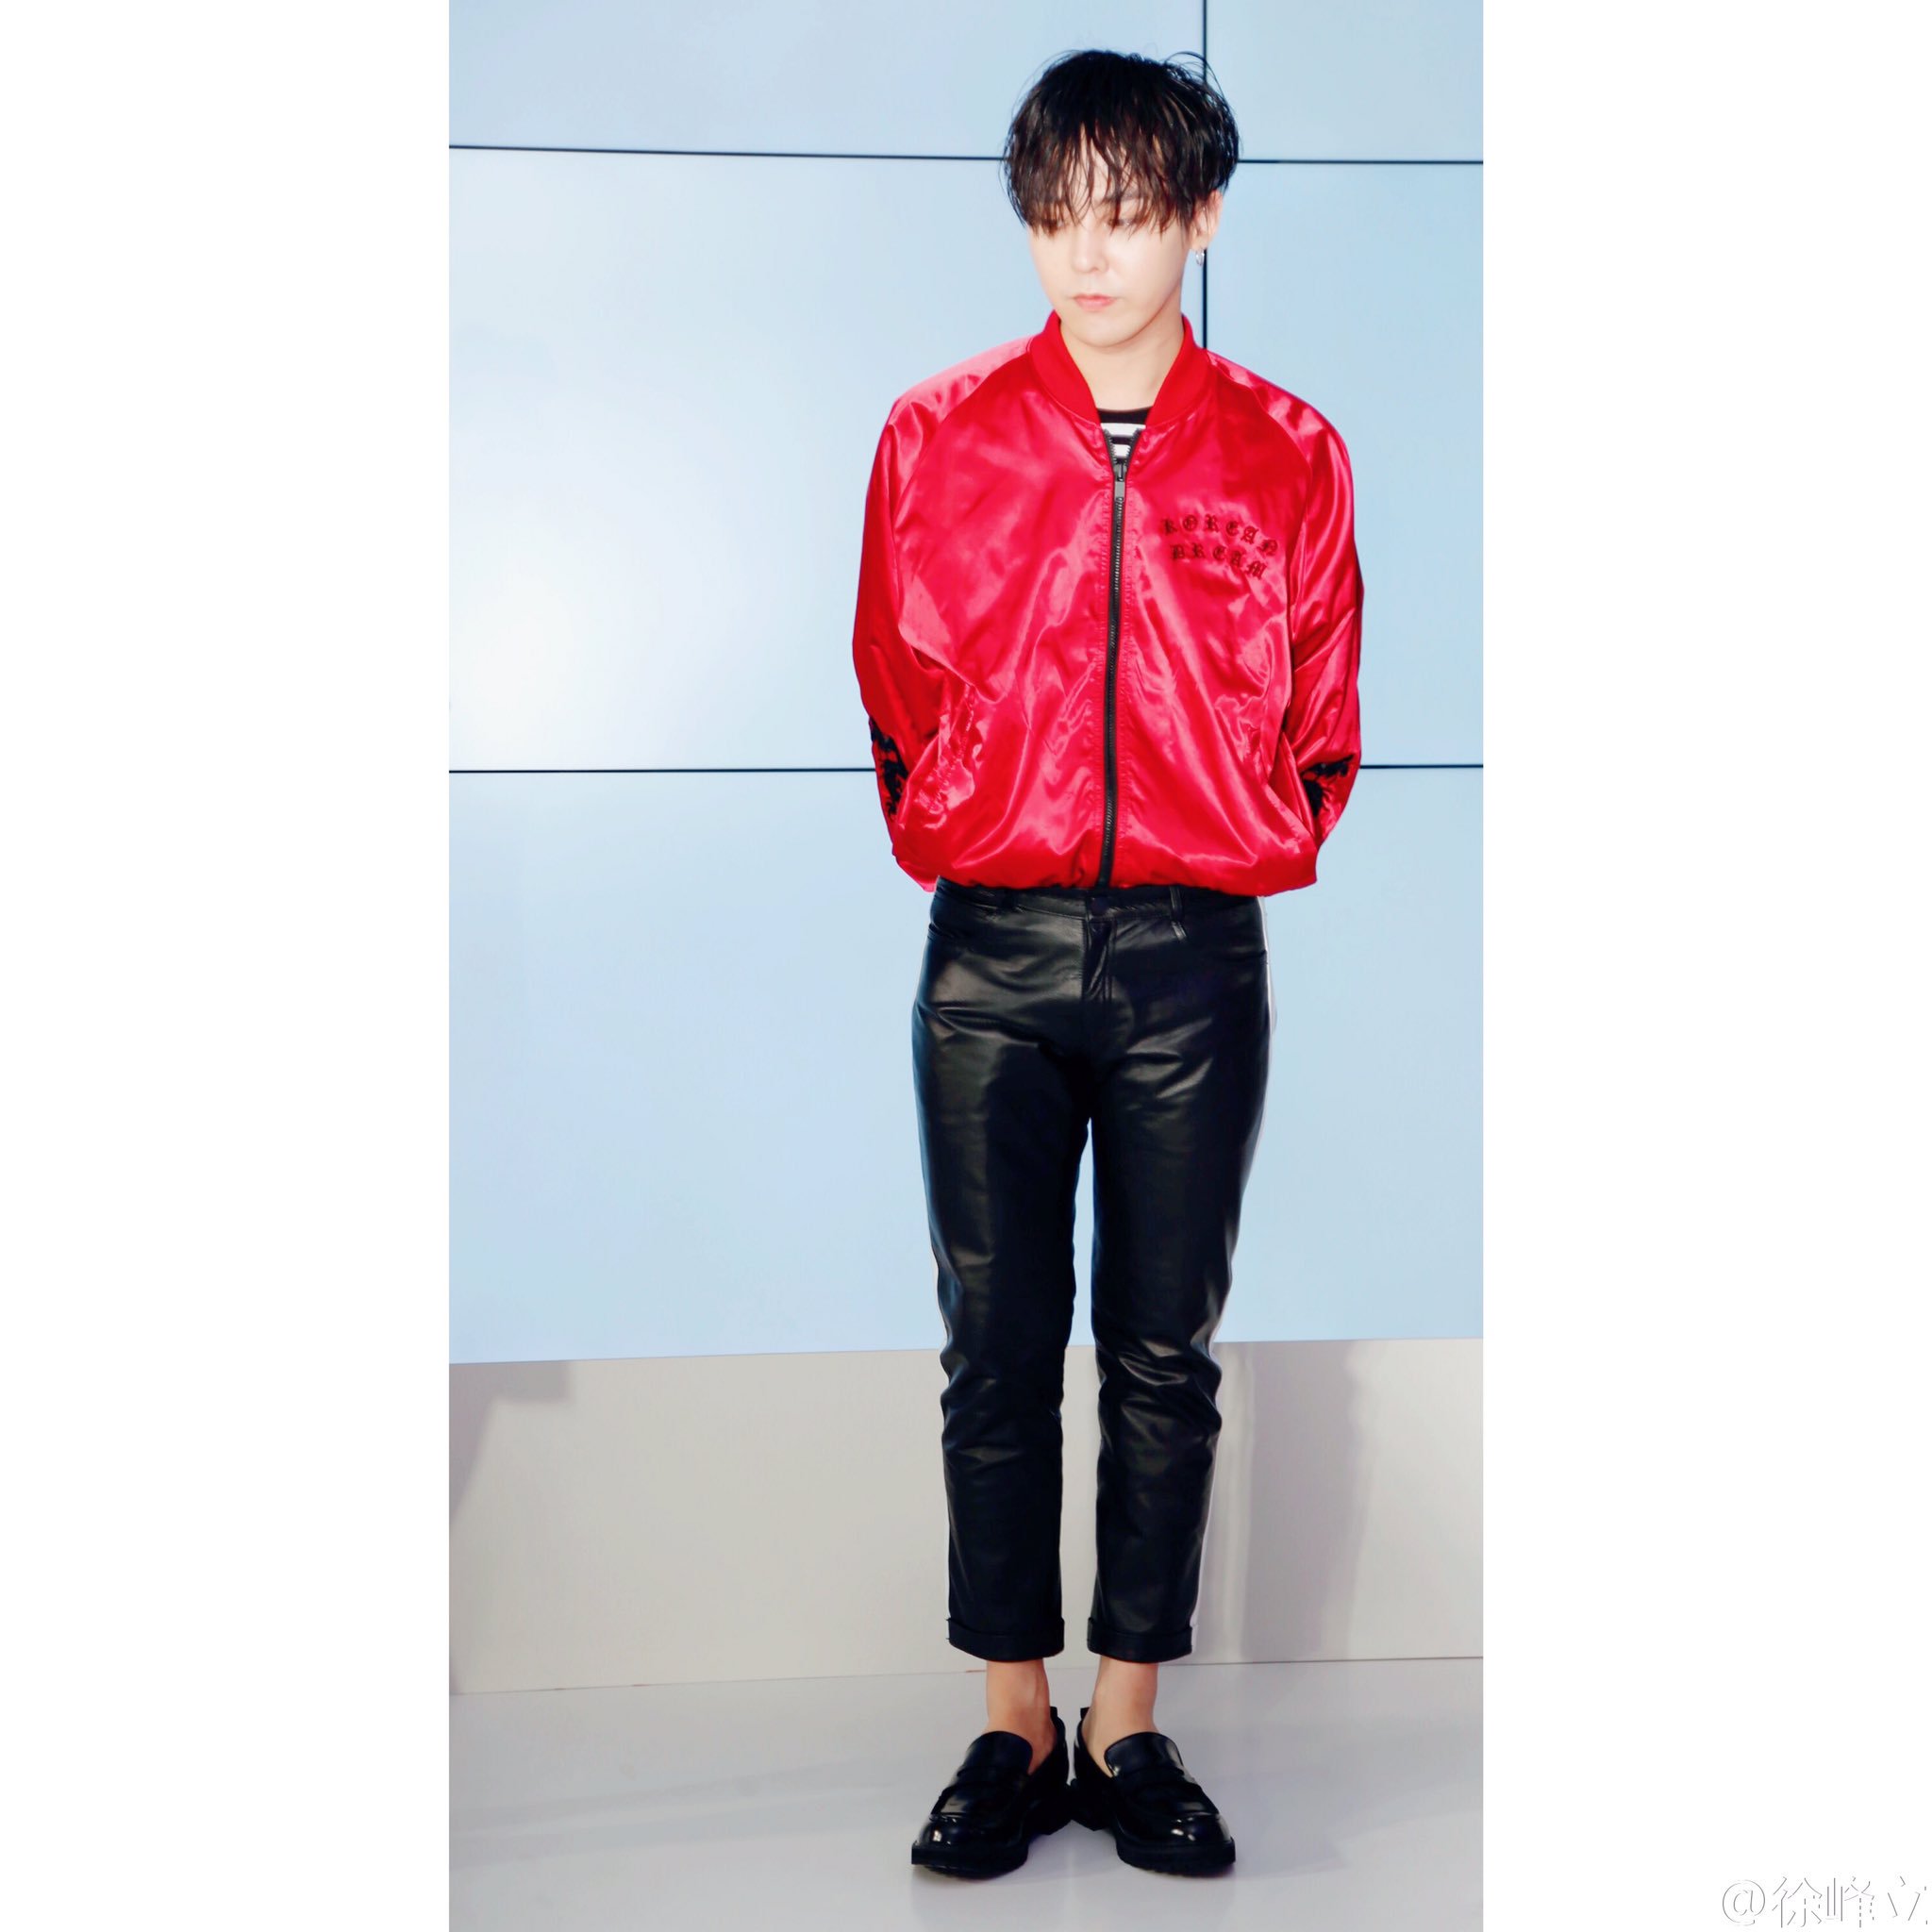 gd-store-opening-shanghai-2016-09-29-20